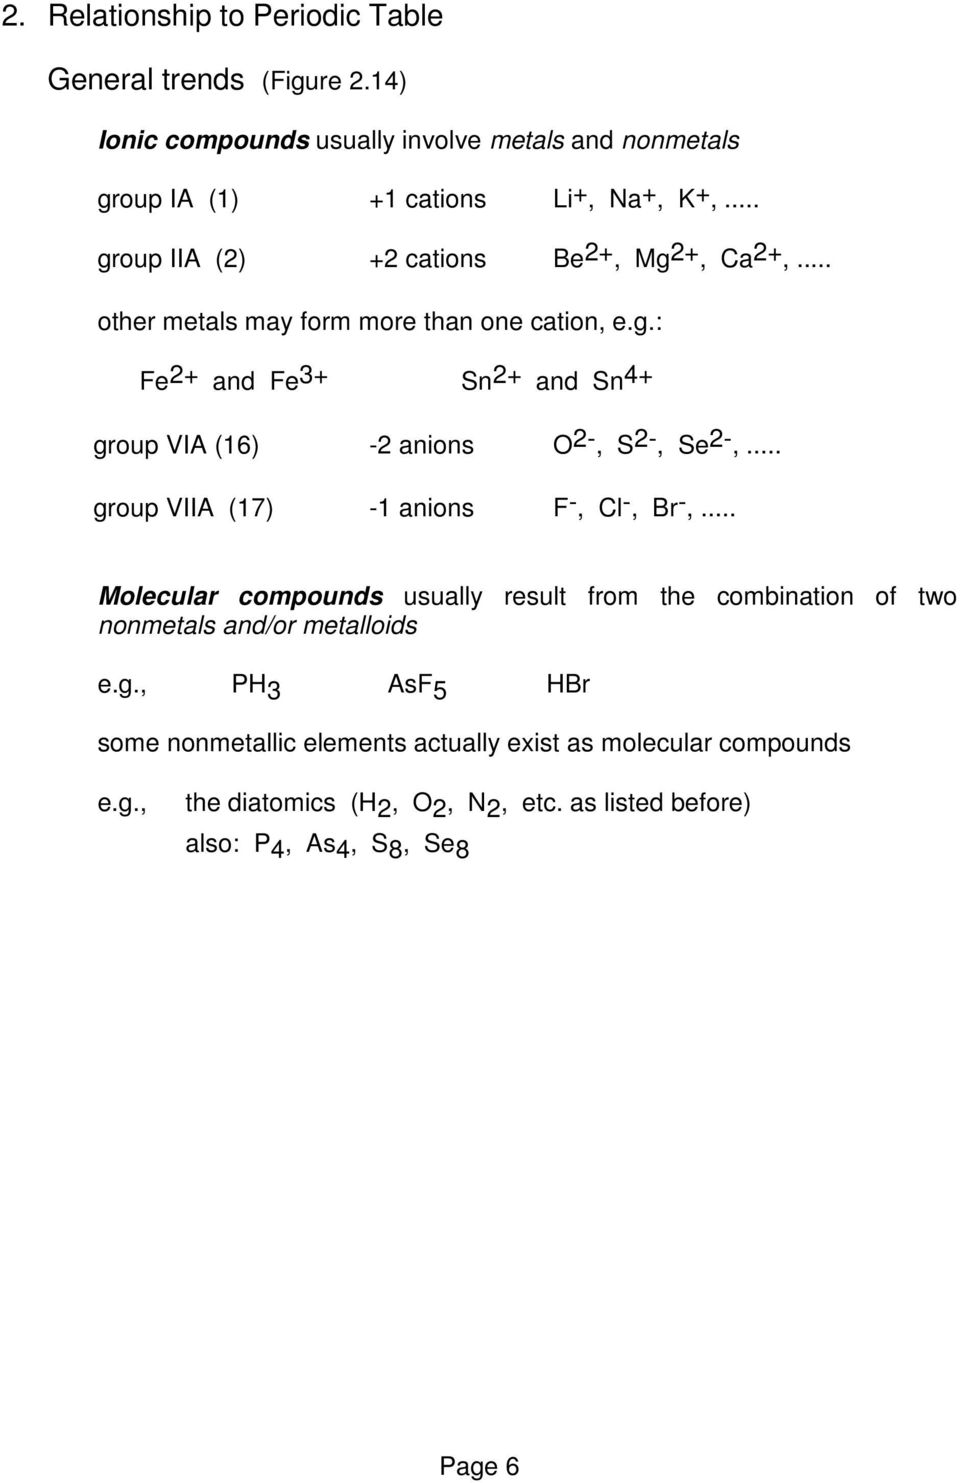 .. group VIIA (17) -1 anions F -, Cl -, Br -,... Molecular compounds usually result from the combination of two nonmetals and/or metalloids e.g., PH 3 AsF 5 HBr some nonmetallic elements actually exist as molecular compounds e.